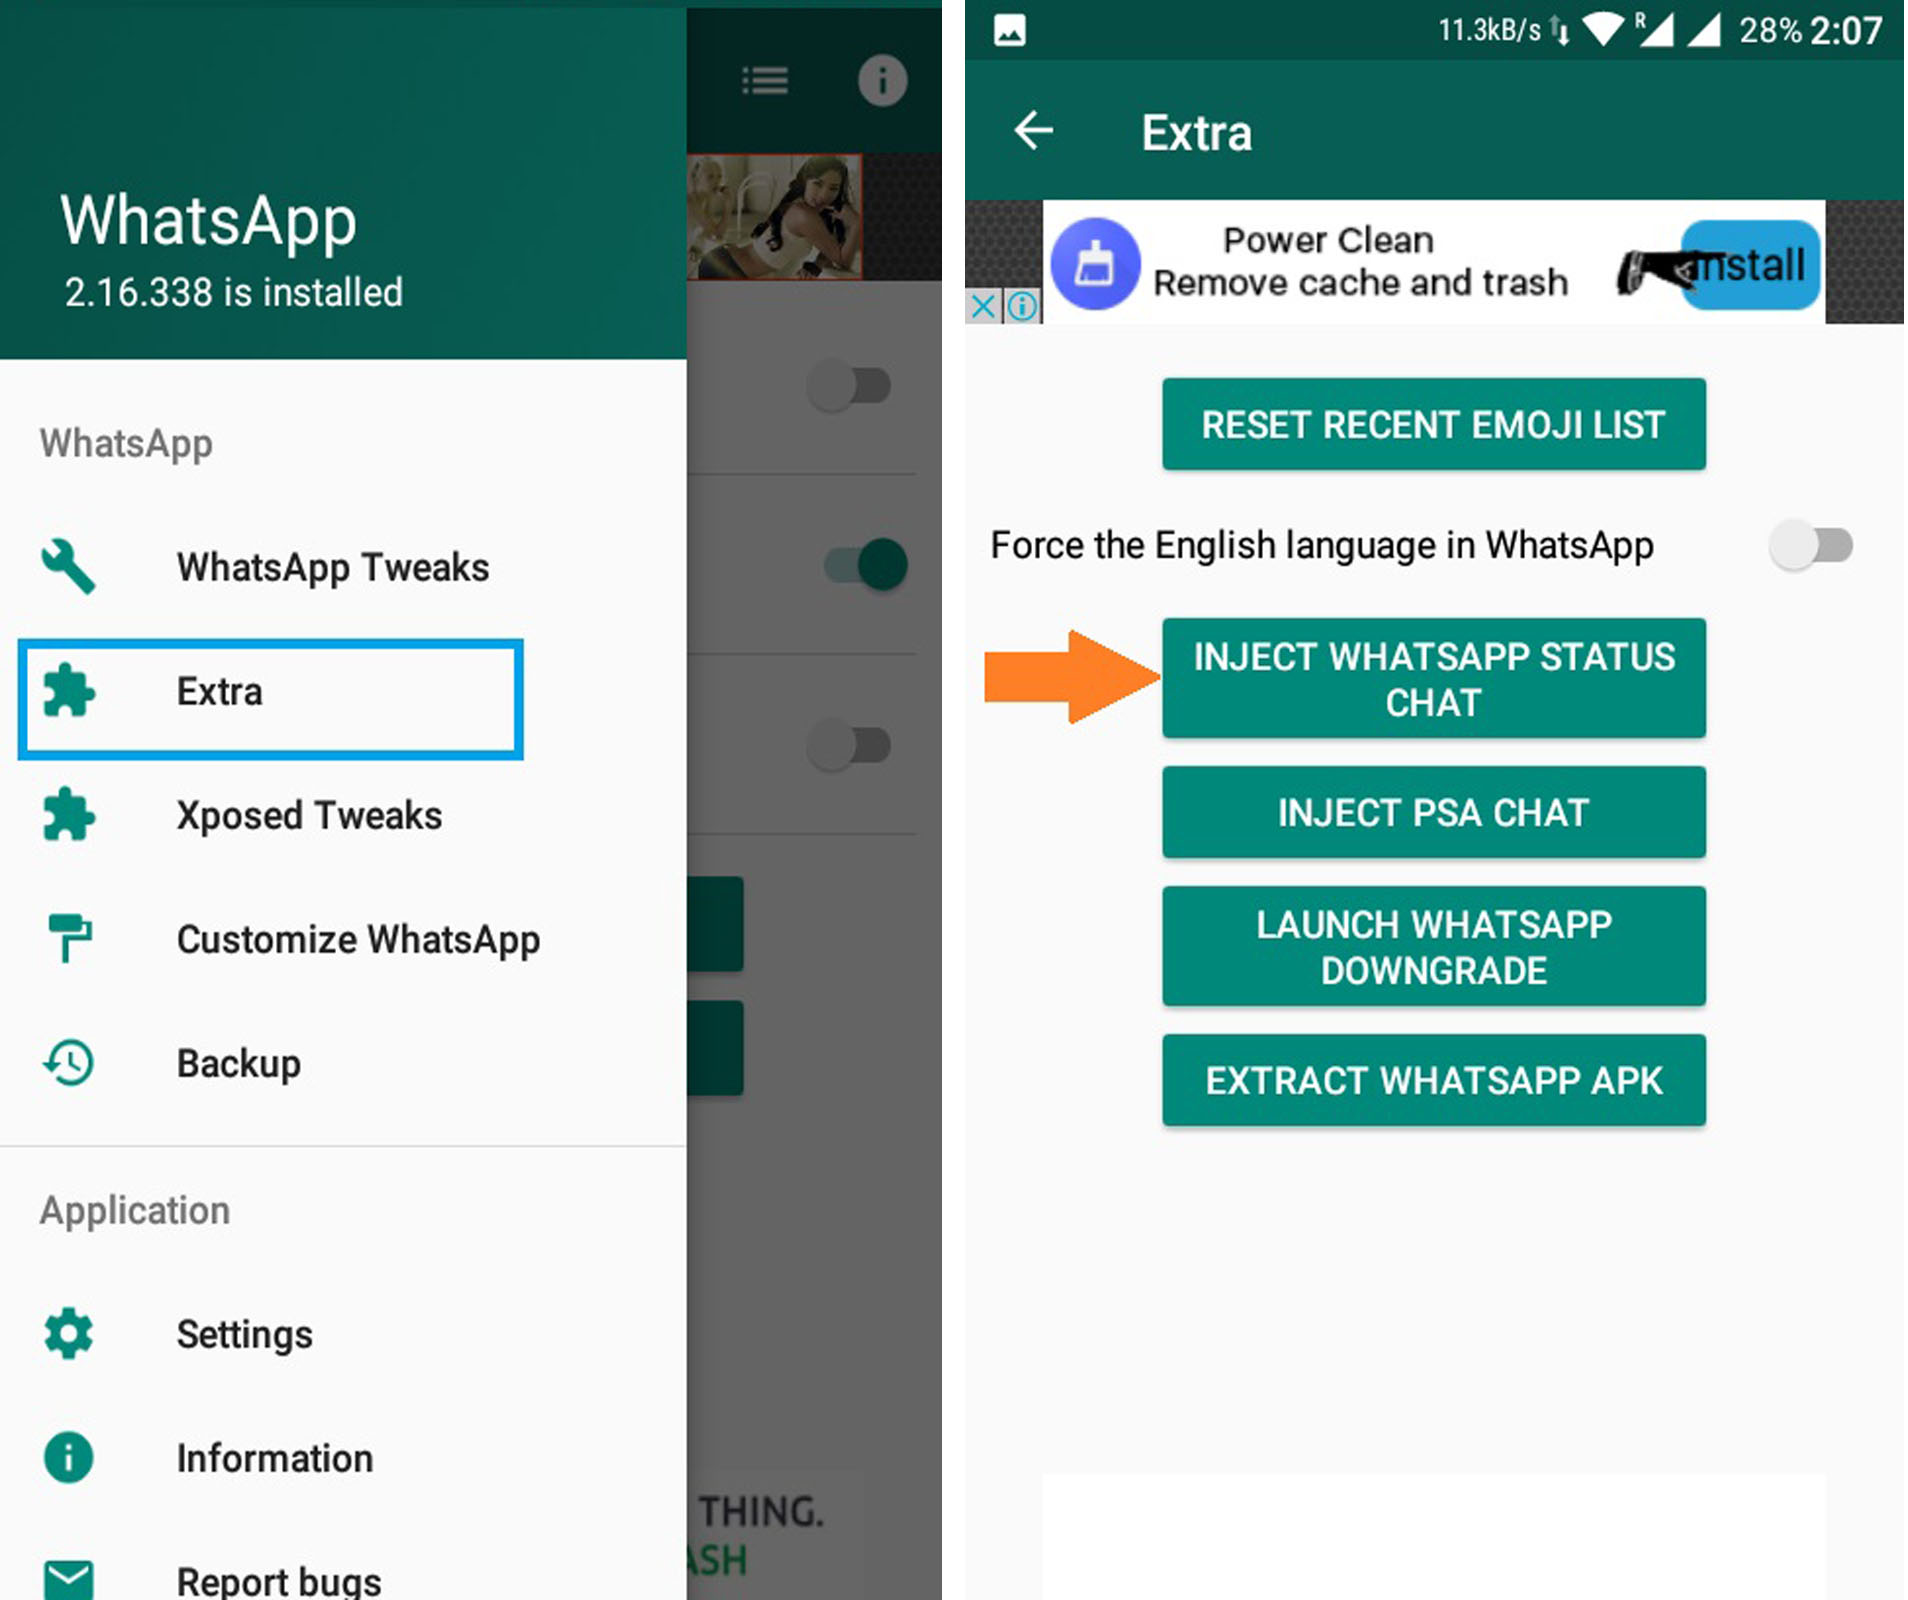 Get New WhatsApp "Status" Feature on Your Android Phone